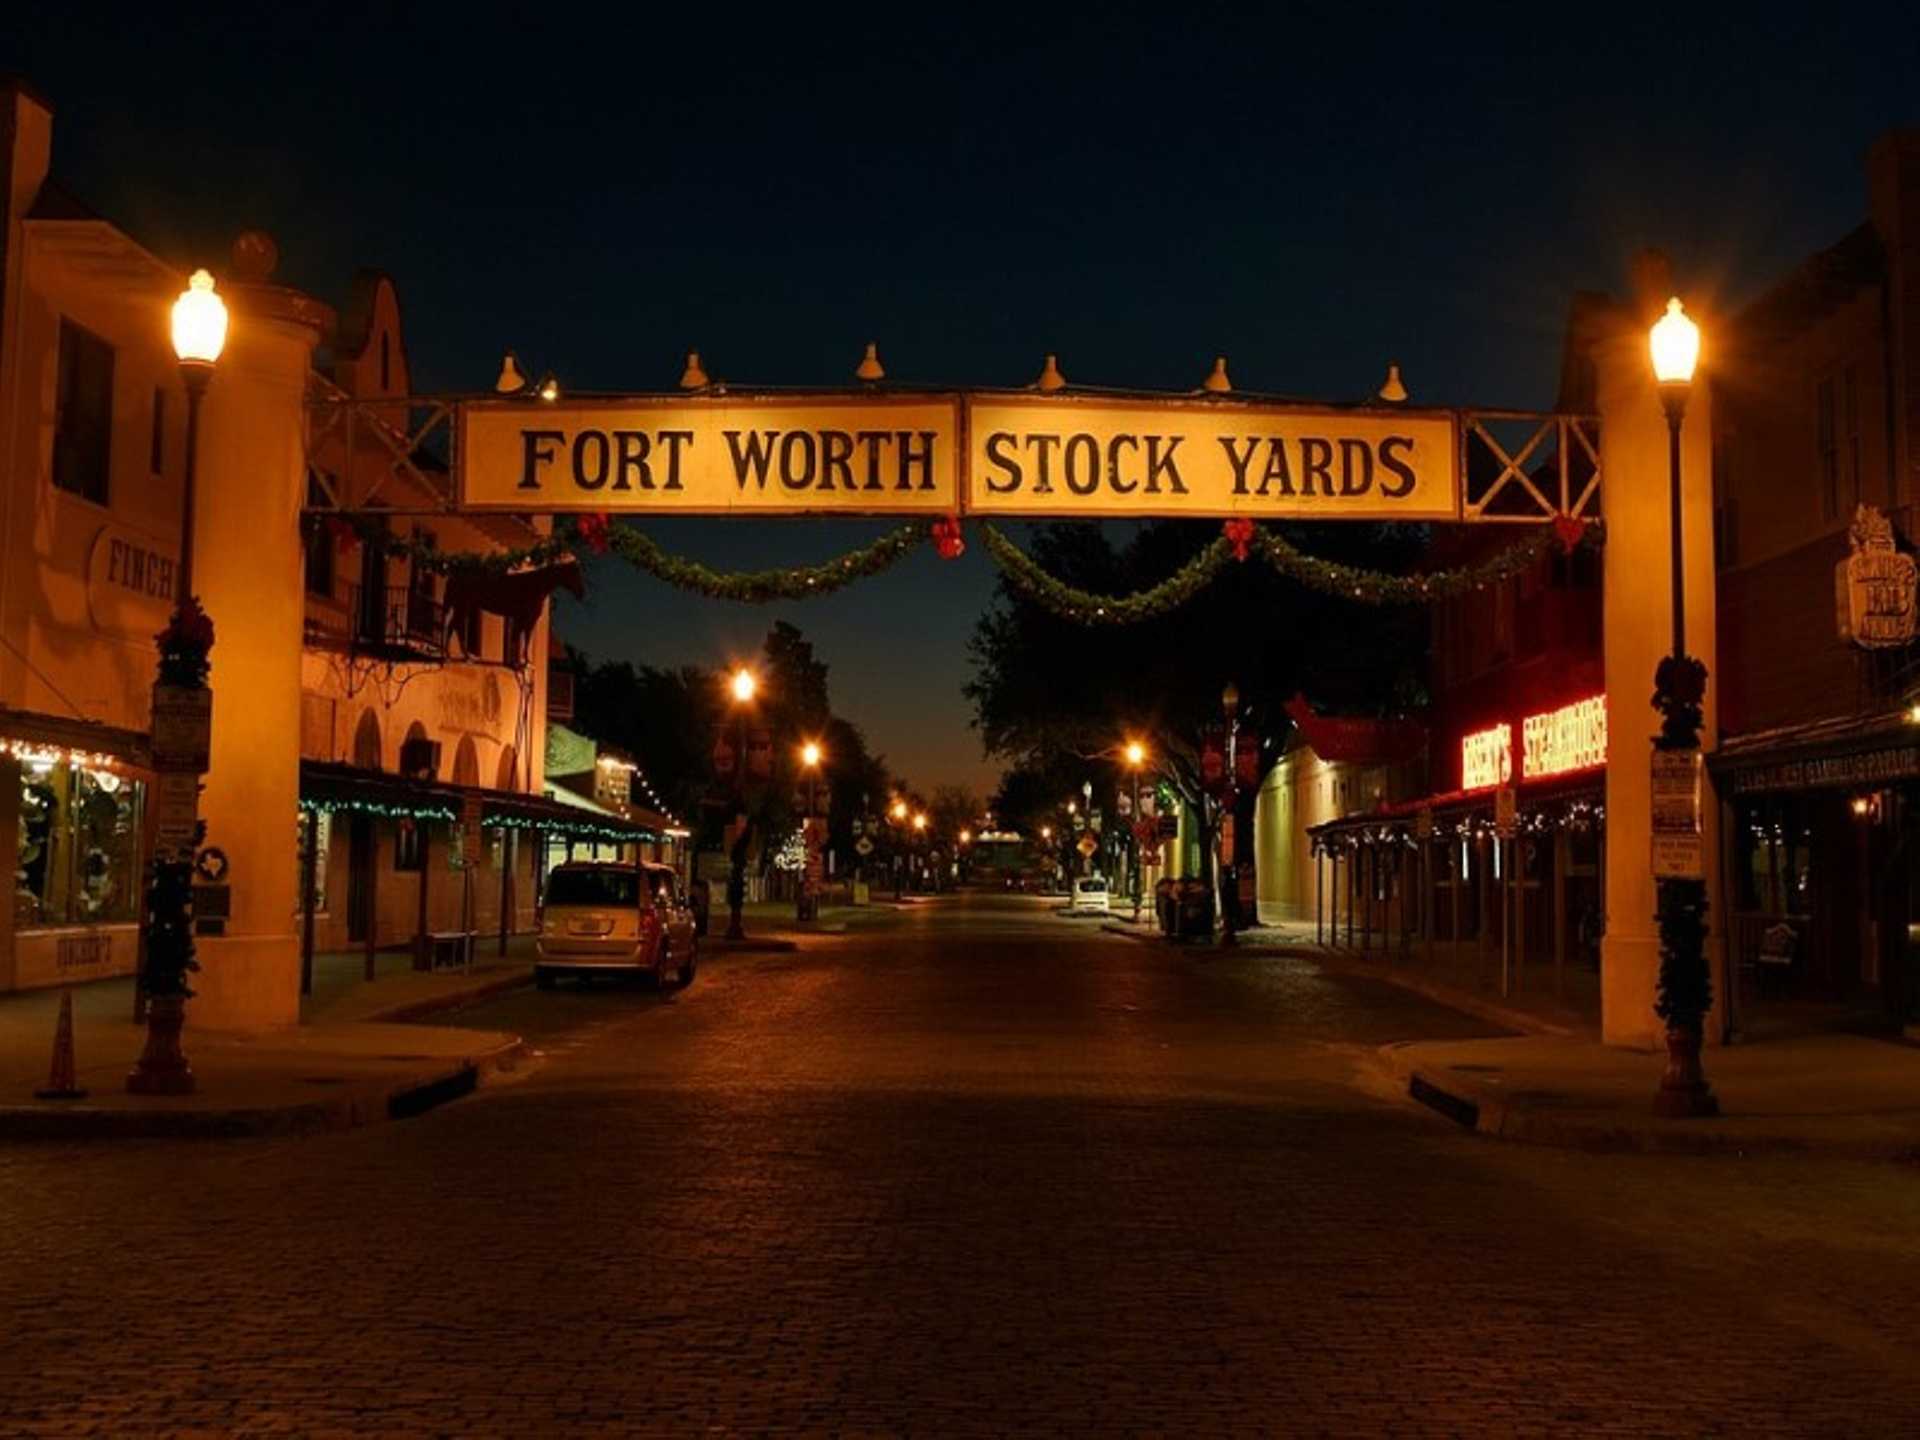 Dallas and Fort Worth Combination Tour